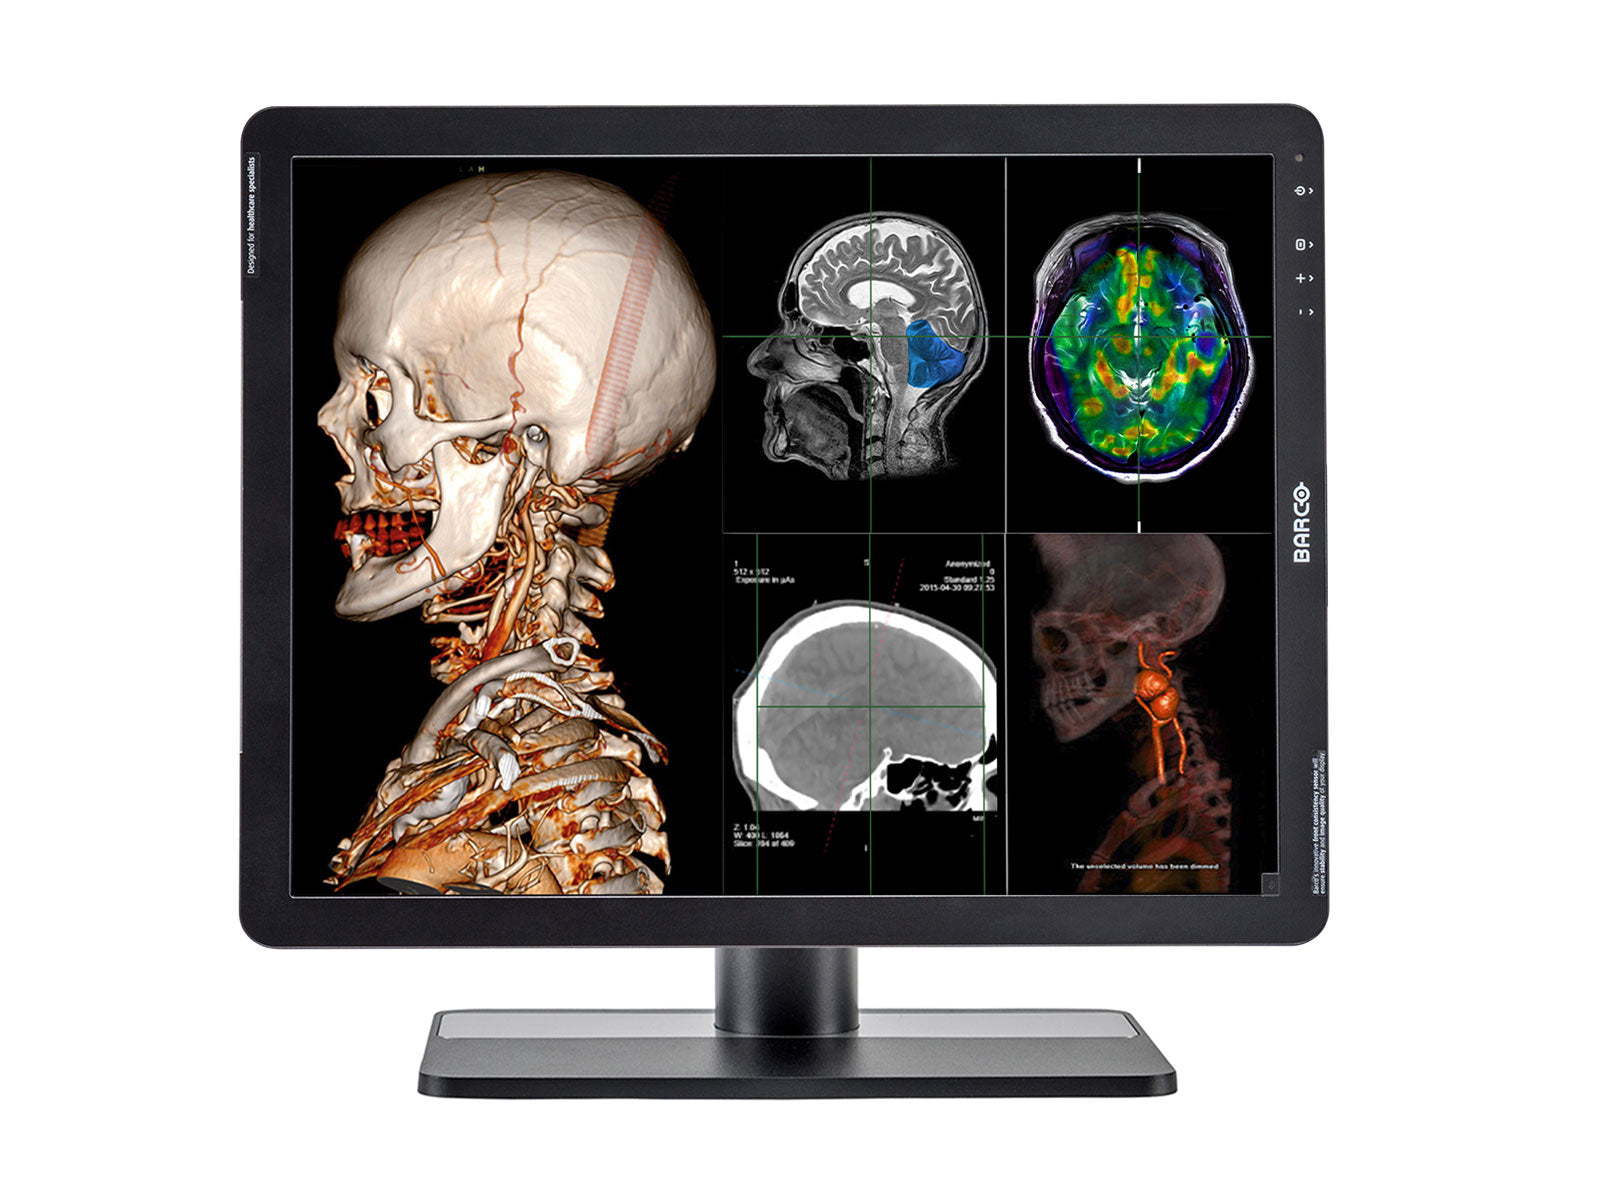 Barco Eonis MDRC-2221 2MP 21" Color LED Clinical Review Display Monitor Monitors.com 